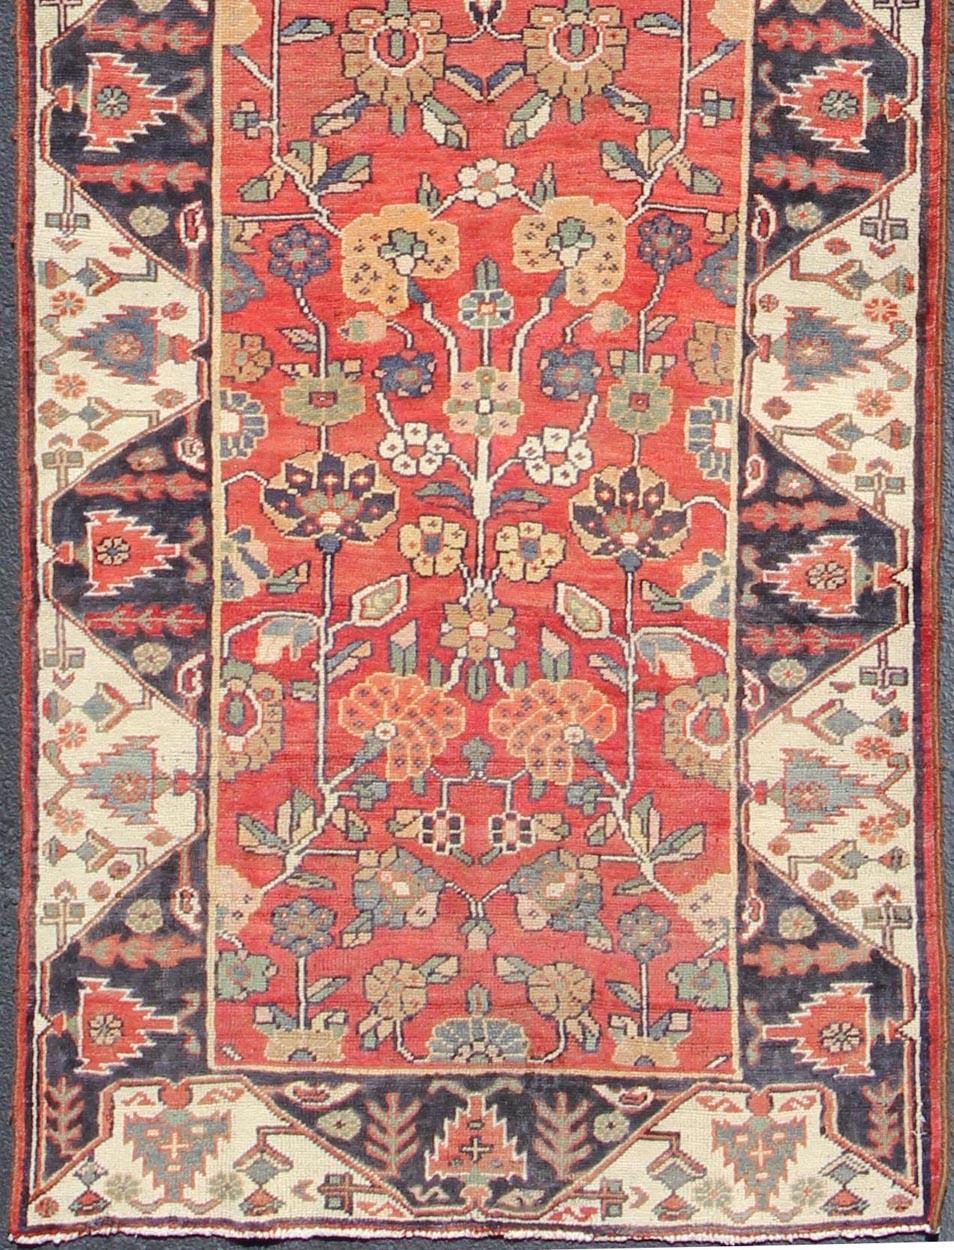 Red, black, and ivory vintage Persian Karadjeh runner with chevron border vining geometric floral designs, rug h-407-3, country of origin / type: Iran / Karadjeh, circa 1950.

This mid-20th century, handwoven vintage Persian Karadjeh runner